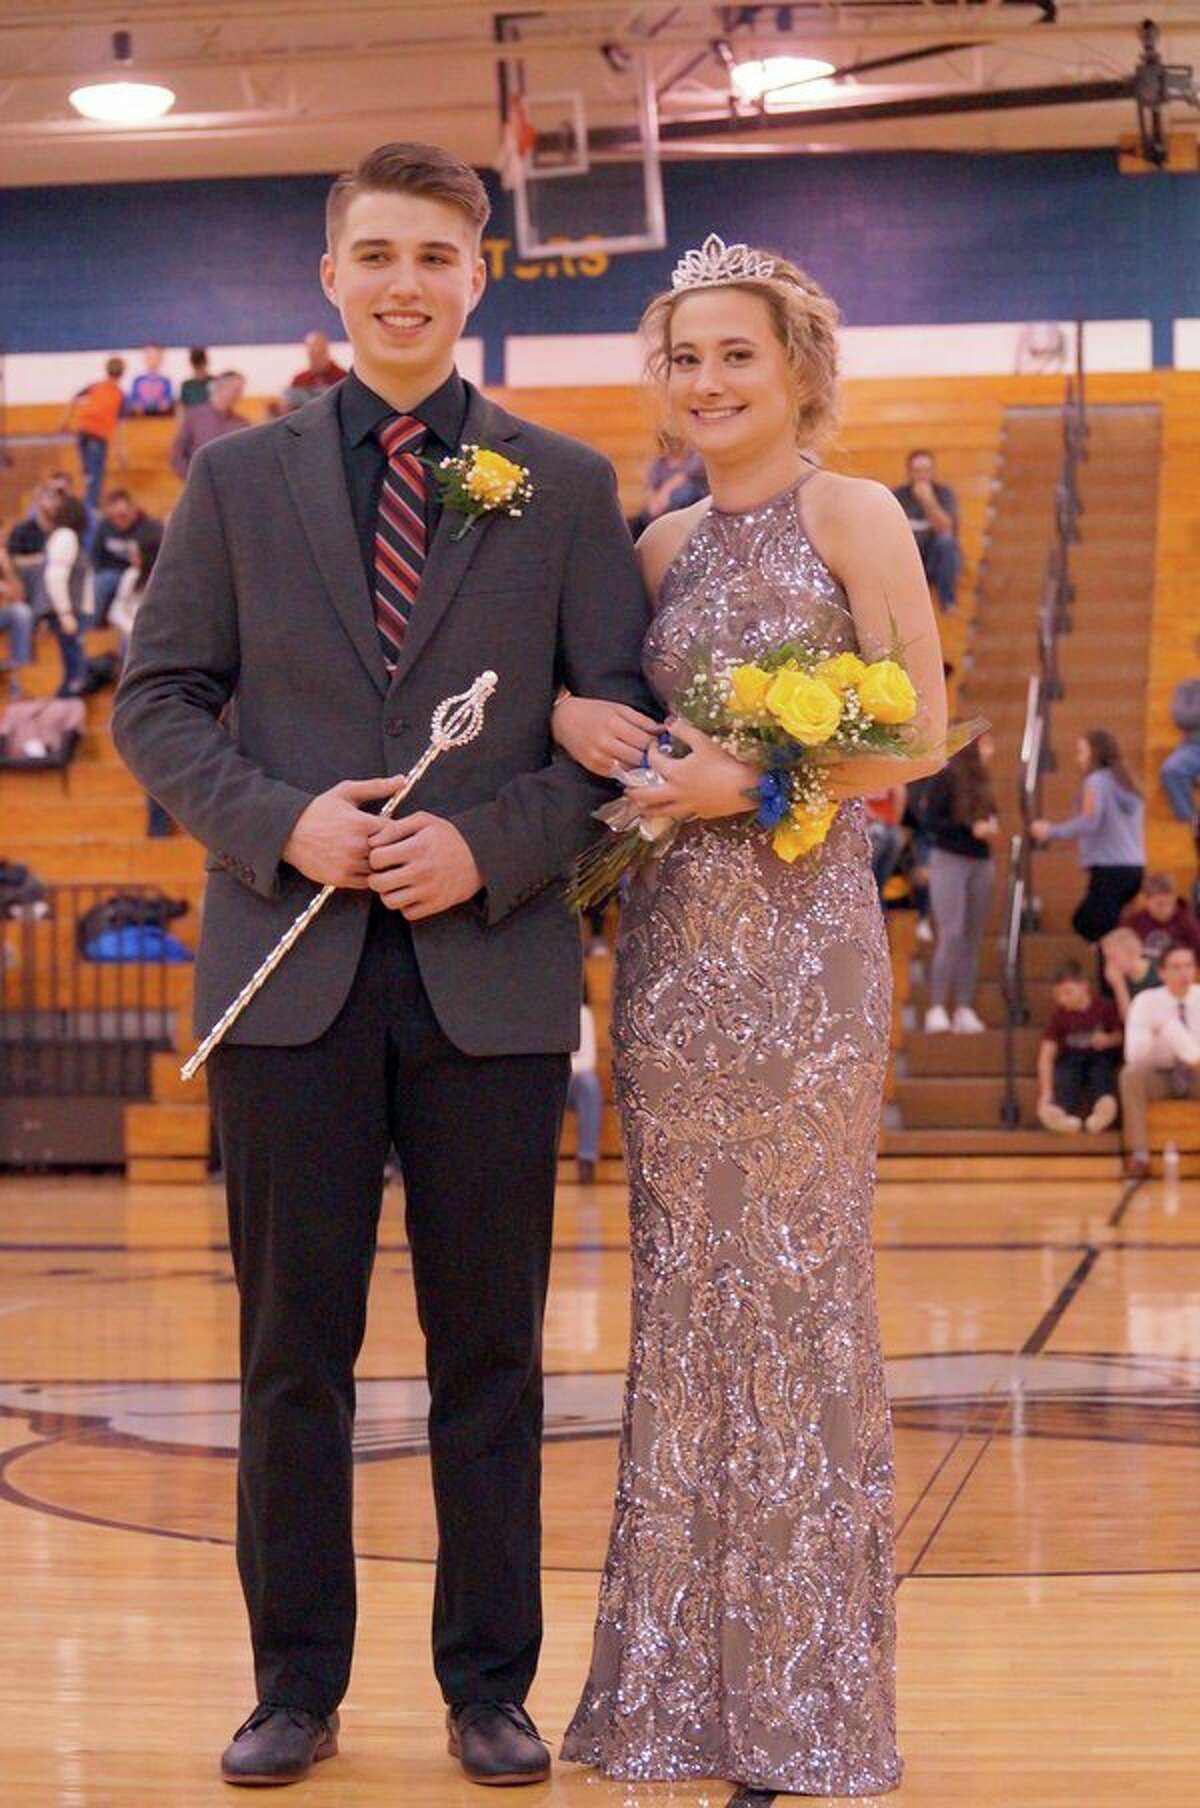 Blake Holdwick and Parker Guigar were recently crowned Bad Axe's Snow Carnival King and Queen. (Submitted Photo)